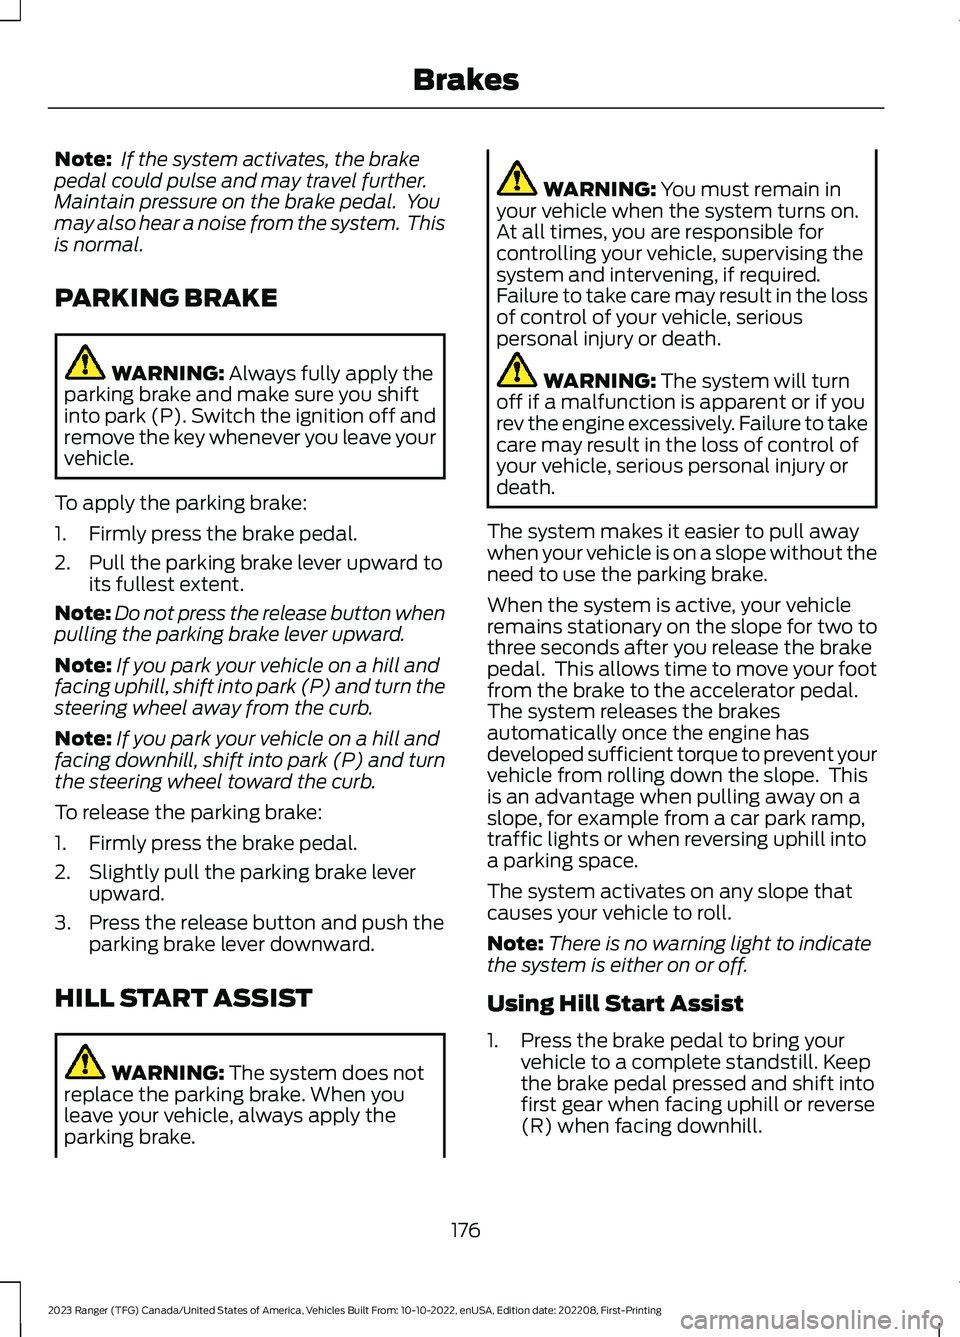 FORD RANGER 2023  Owners Manual Note: If the system activates, the brakepedal could pulse and may travel further.Maintain pressure on the brake pedal.  Youmay also hear a noise from the system.  Thisis normal.
PARKING BRAKE
WARNING: